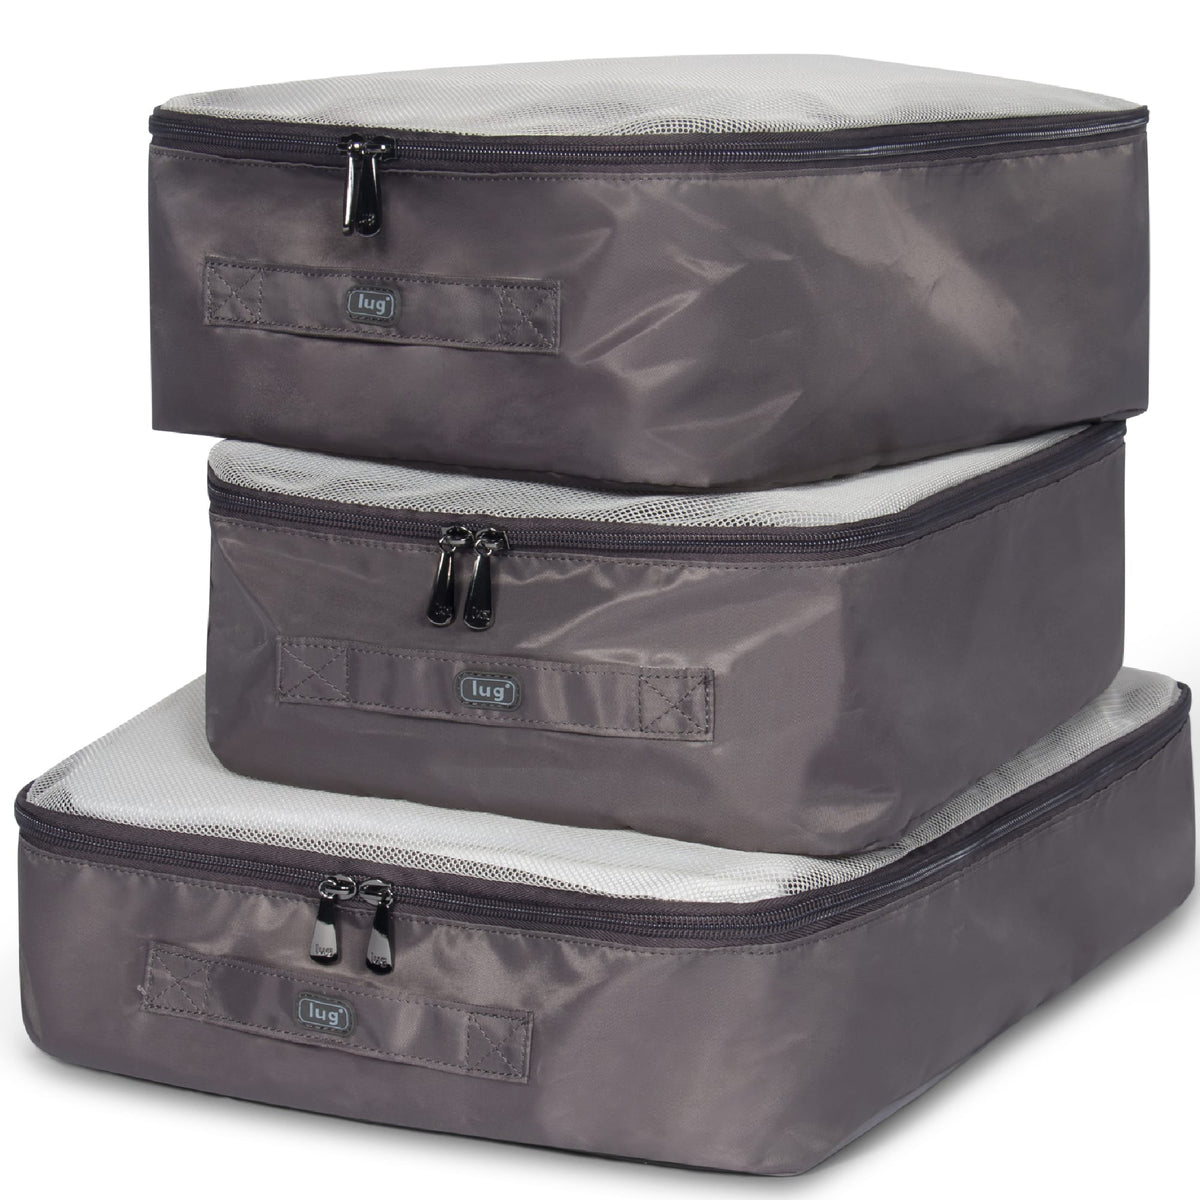 Cargo 3pc Packing Cubes